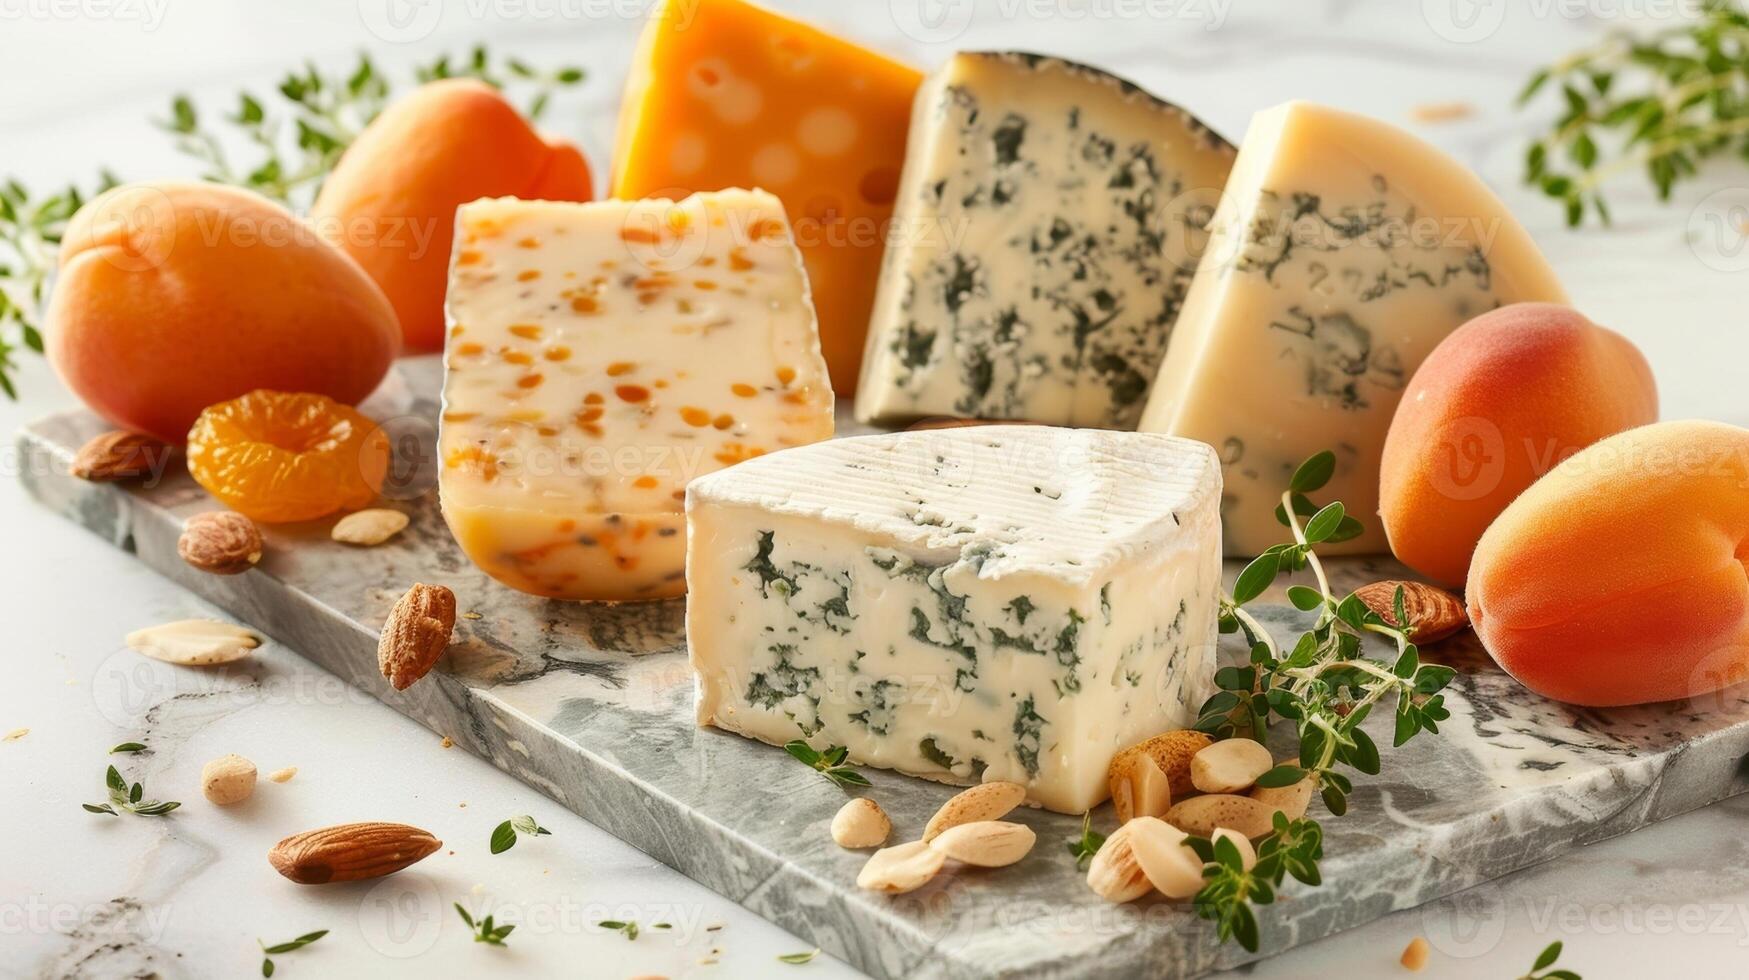 A cheese lovers dream come true with wedges of sharp cheddar tangy goat cheese and creamy blue cheese all presented alongside plump apricots and crunchy almonds photo